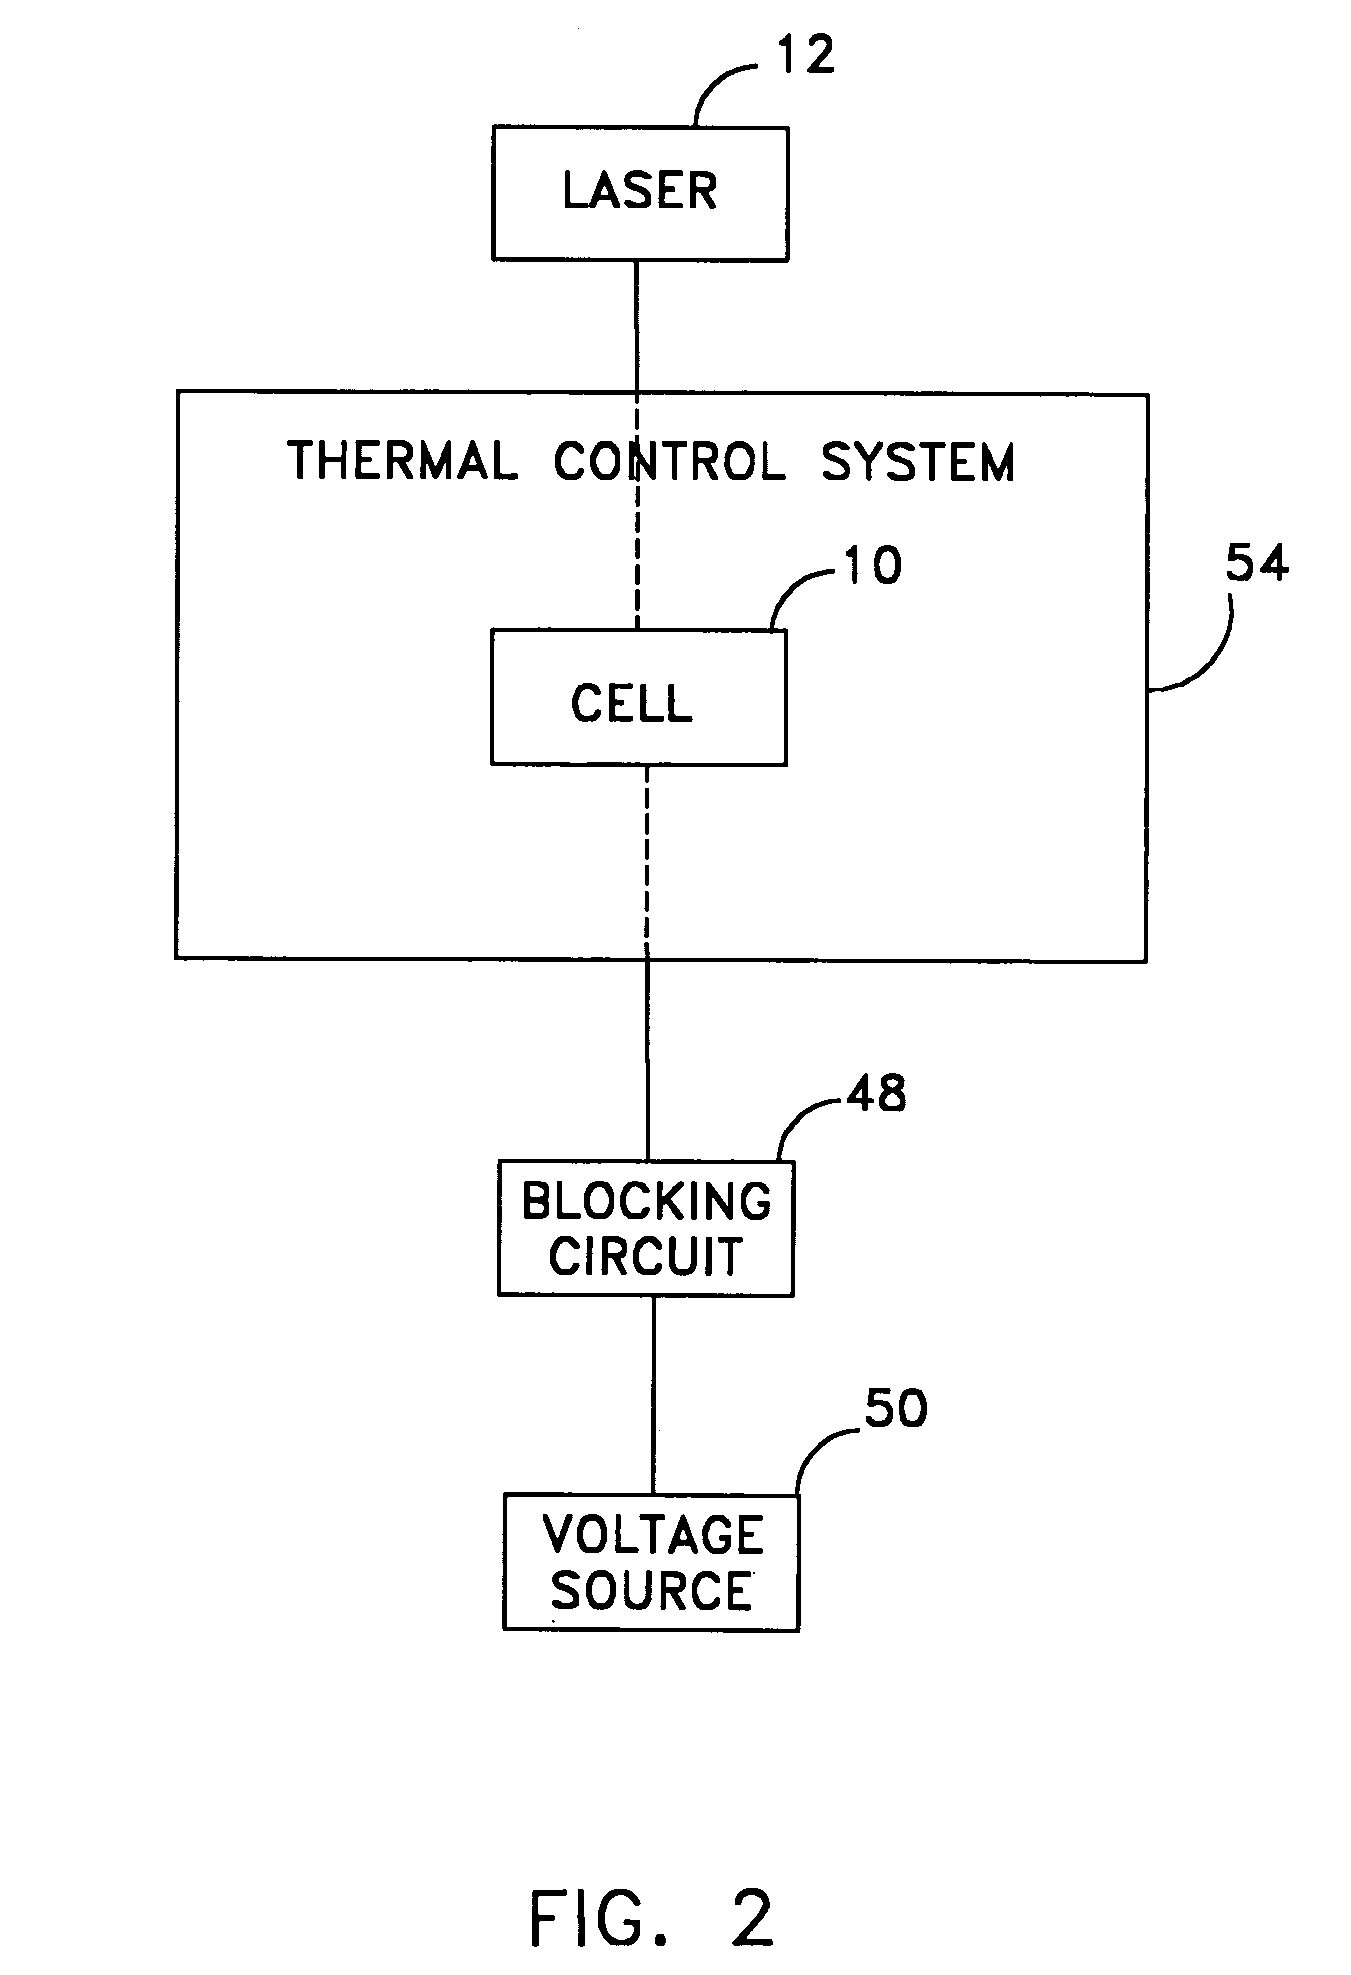 System and apparatus for measuring displacements in electro-active materials